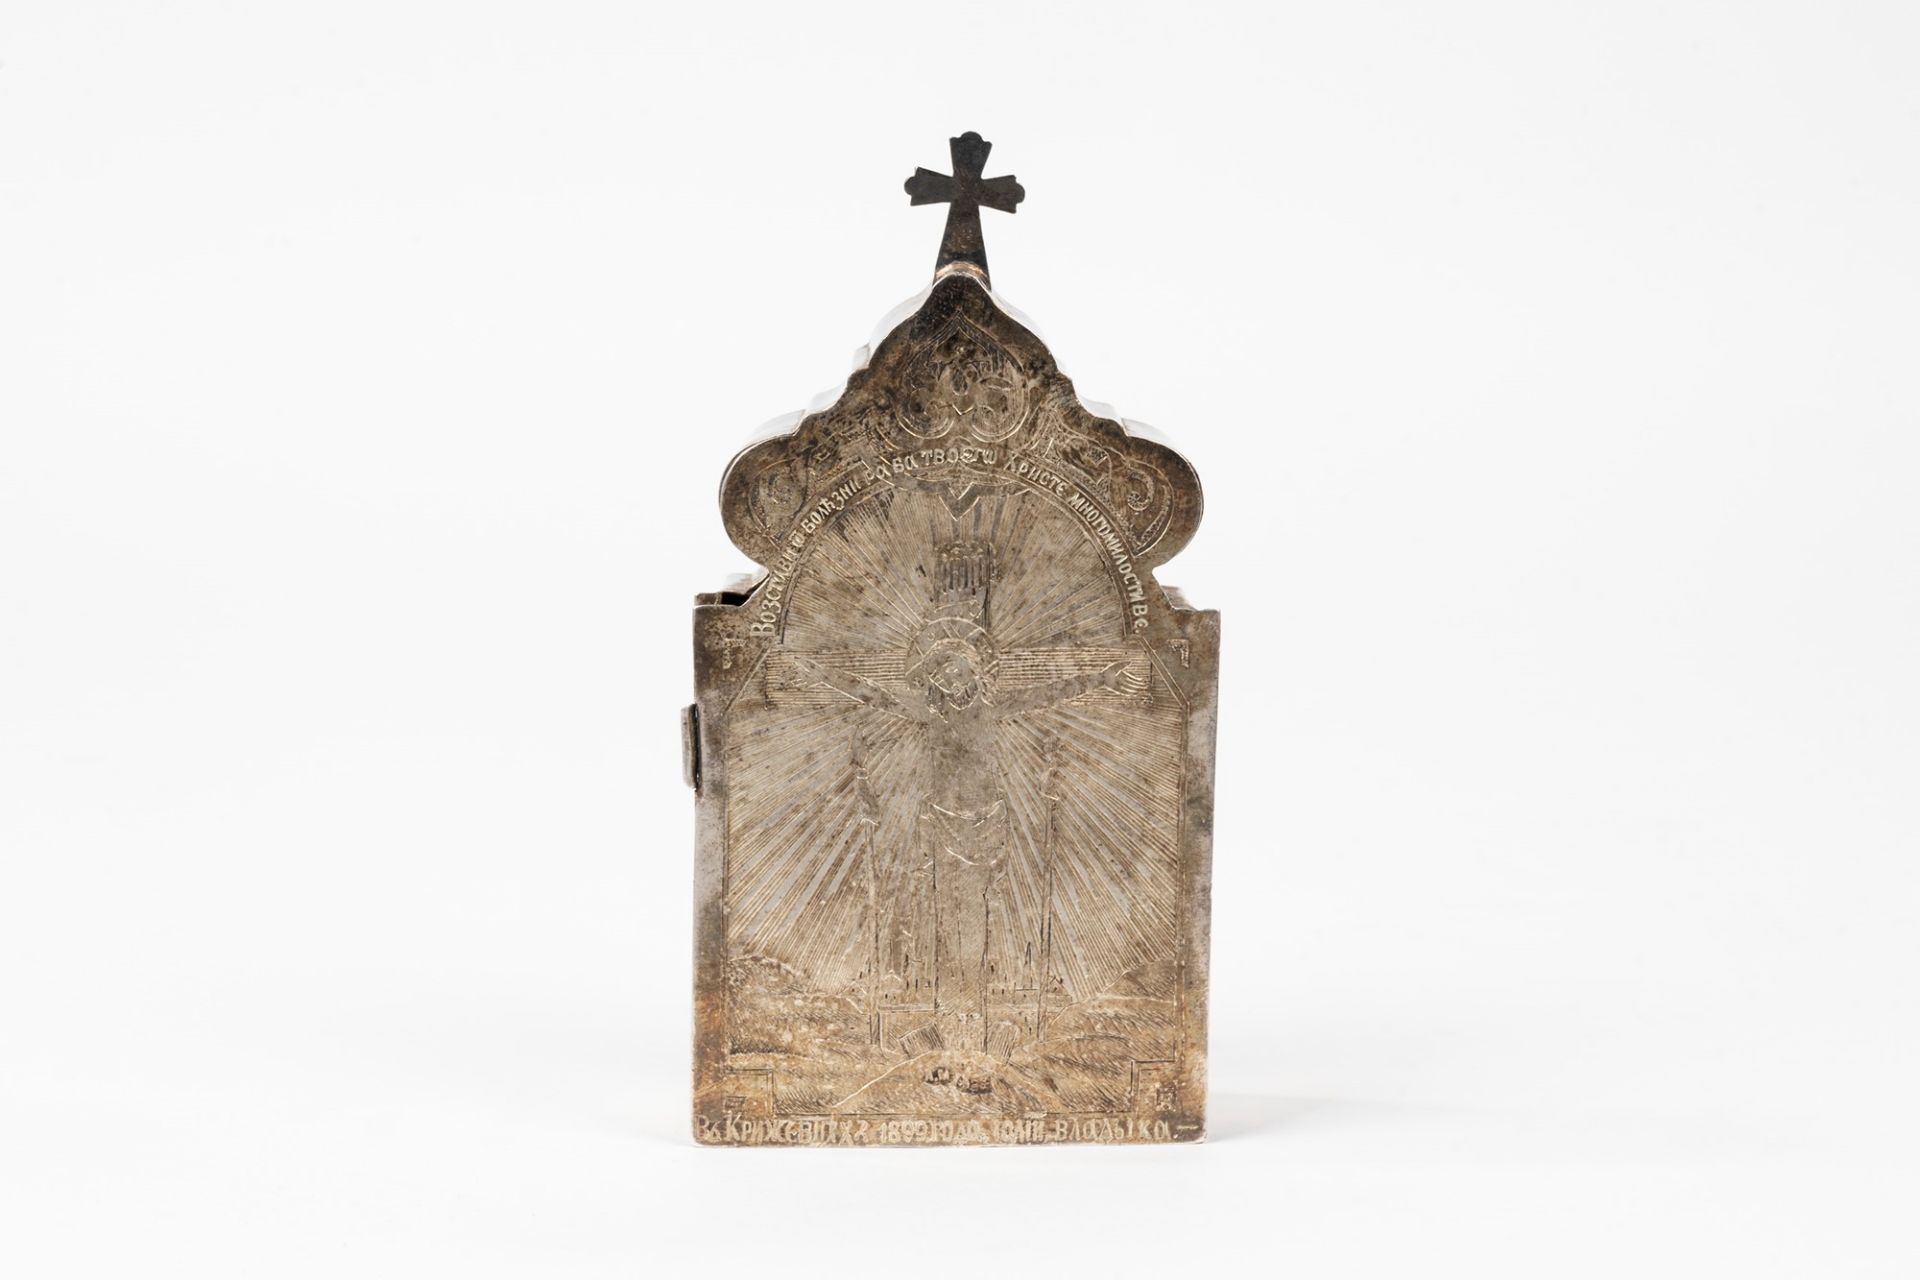 Portable mass box containing Eucharistic instruments, Russia, 19th century - Image 3 of 6